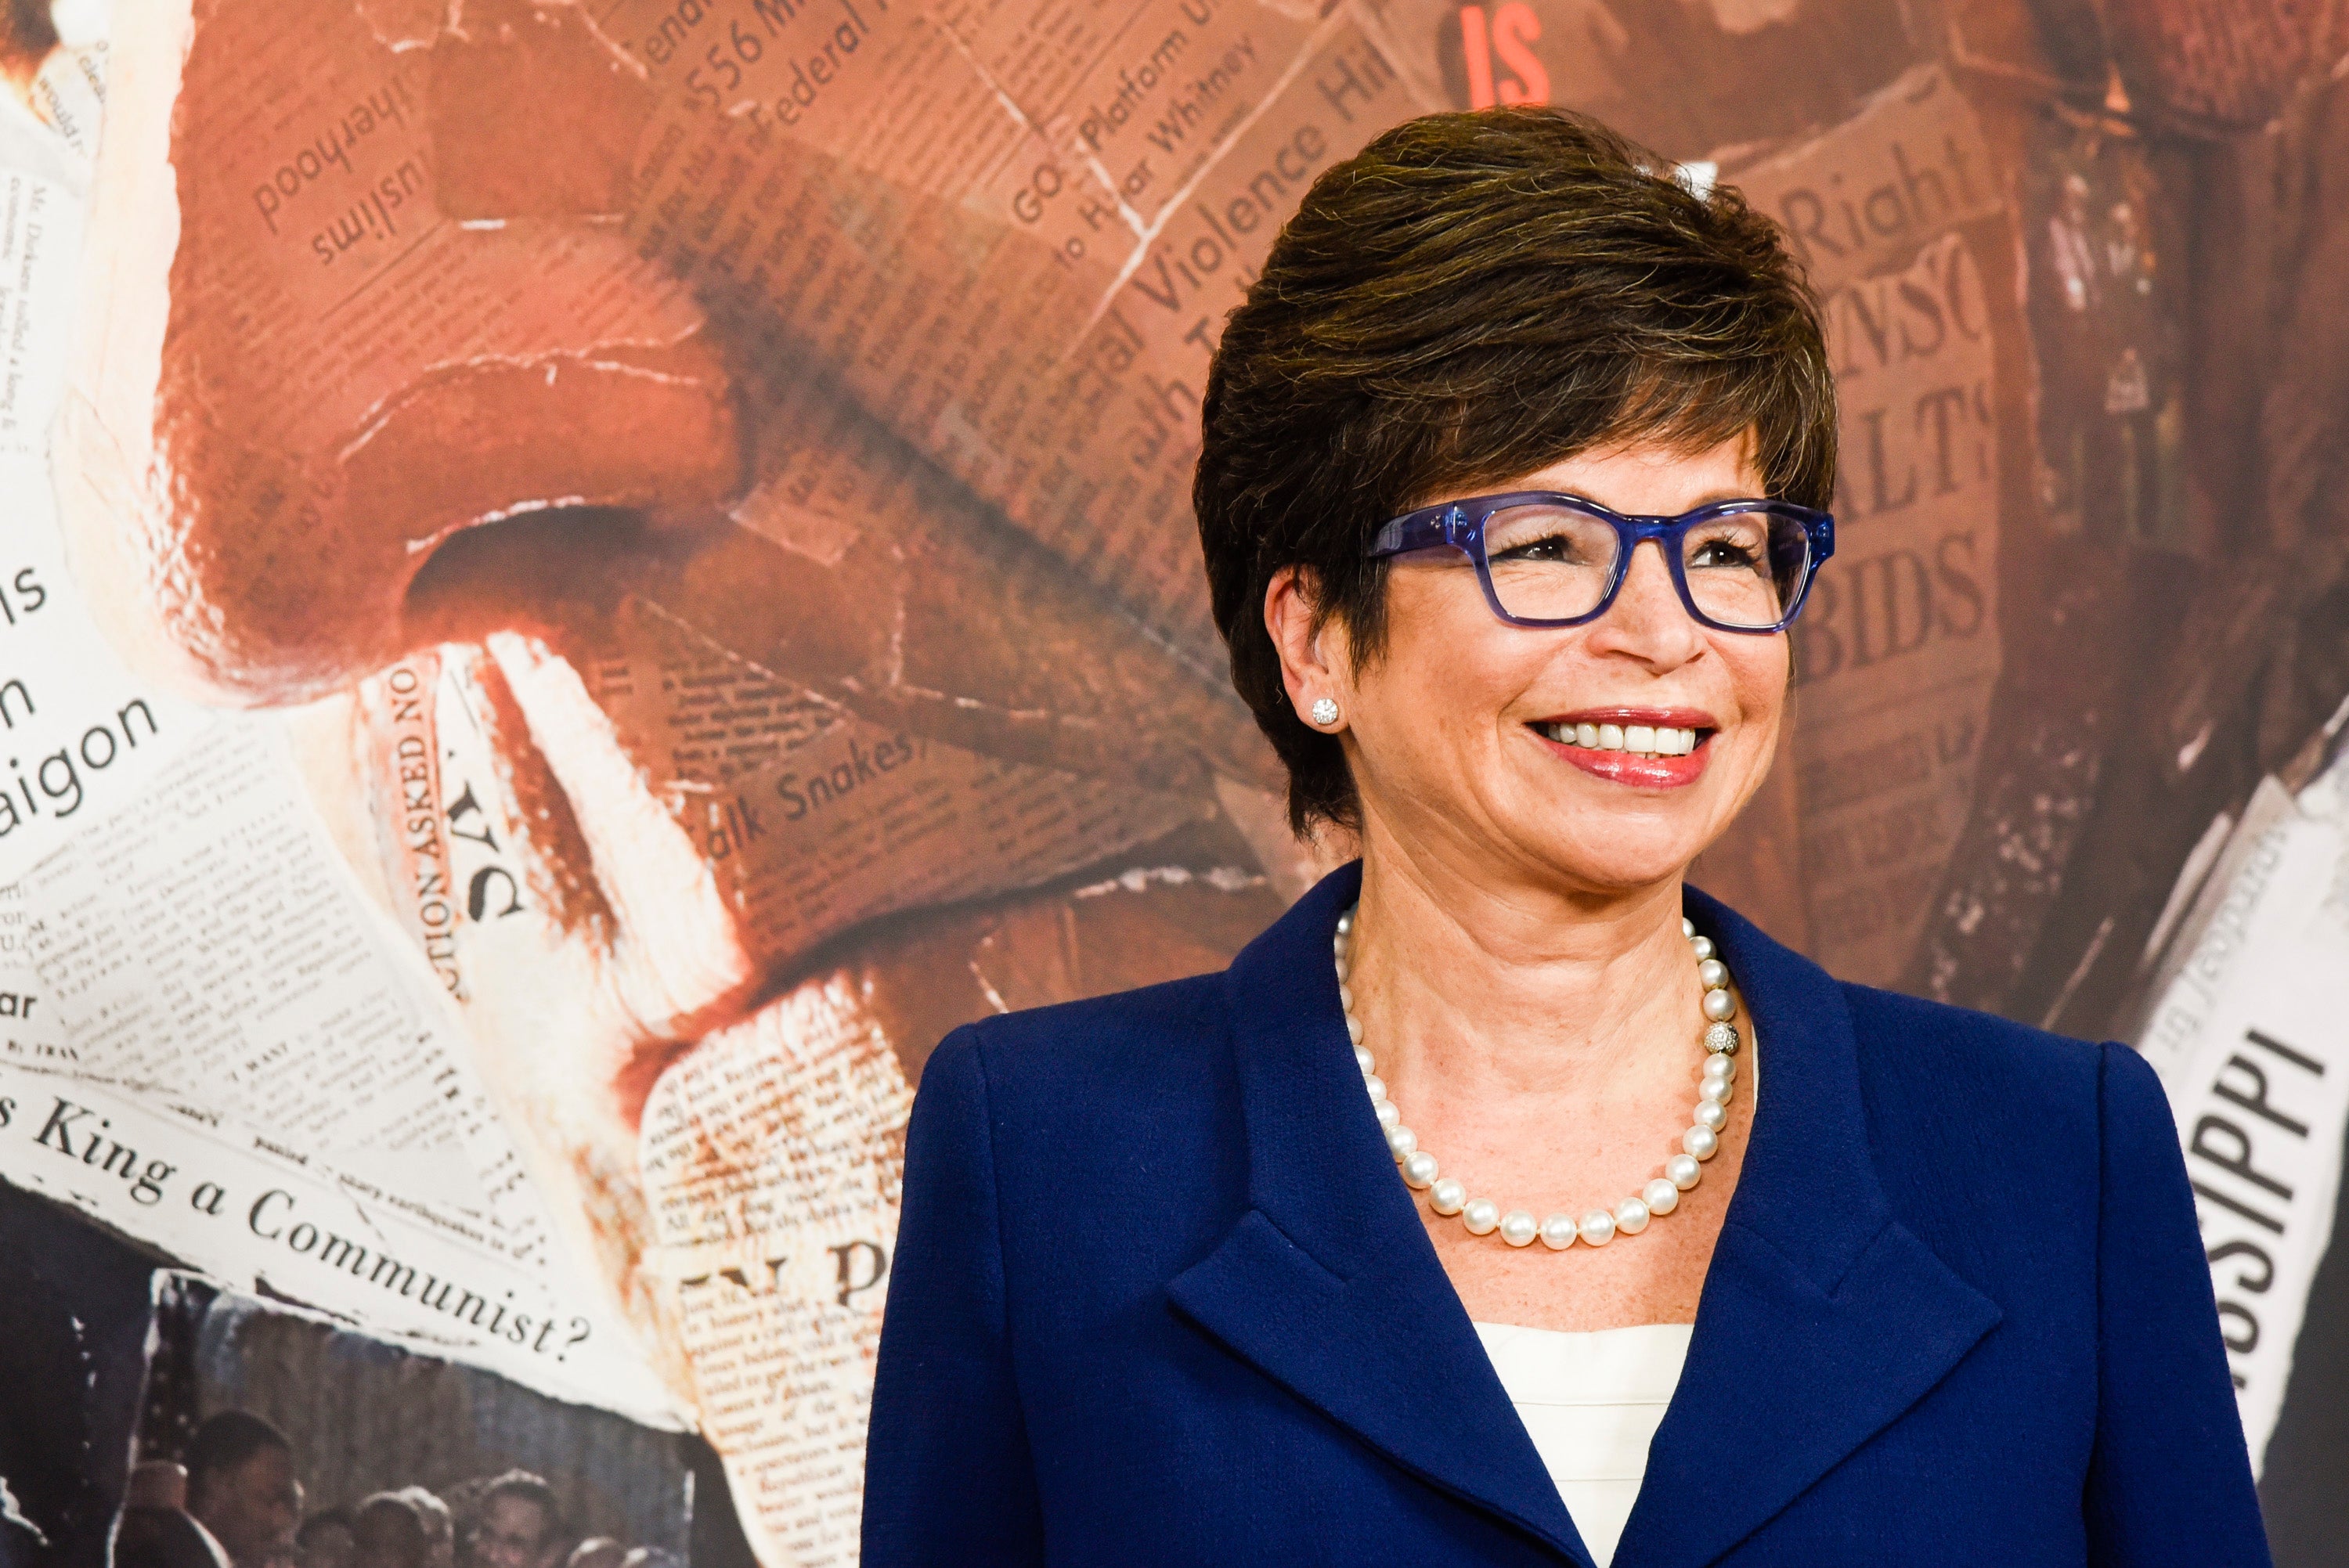 Valerie Jarrett Is Giving Women, Activists The Tools They Need To Hold Political Office
